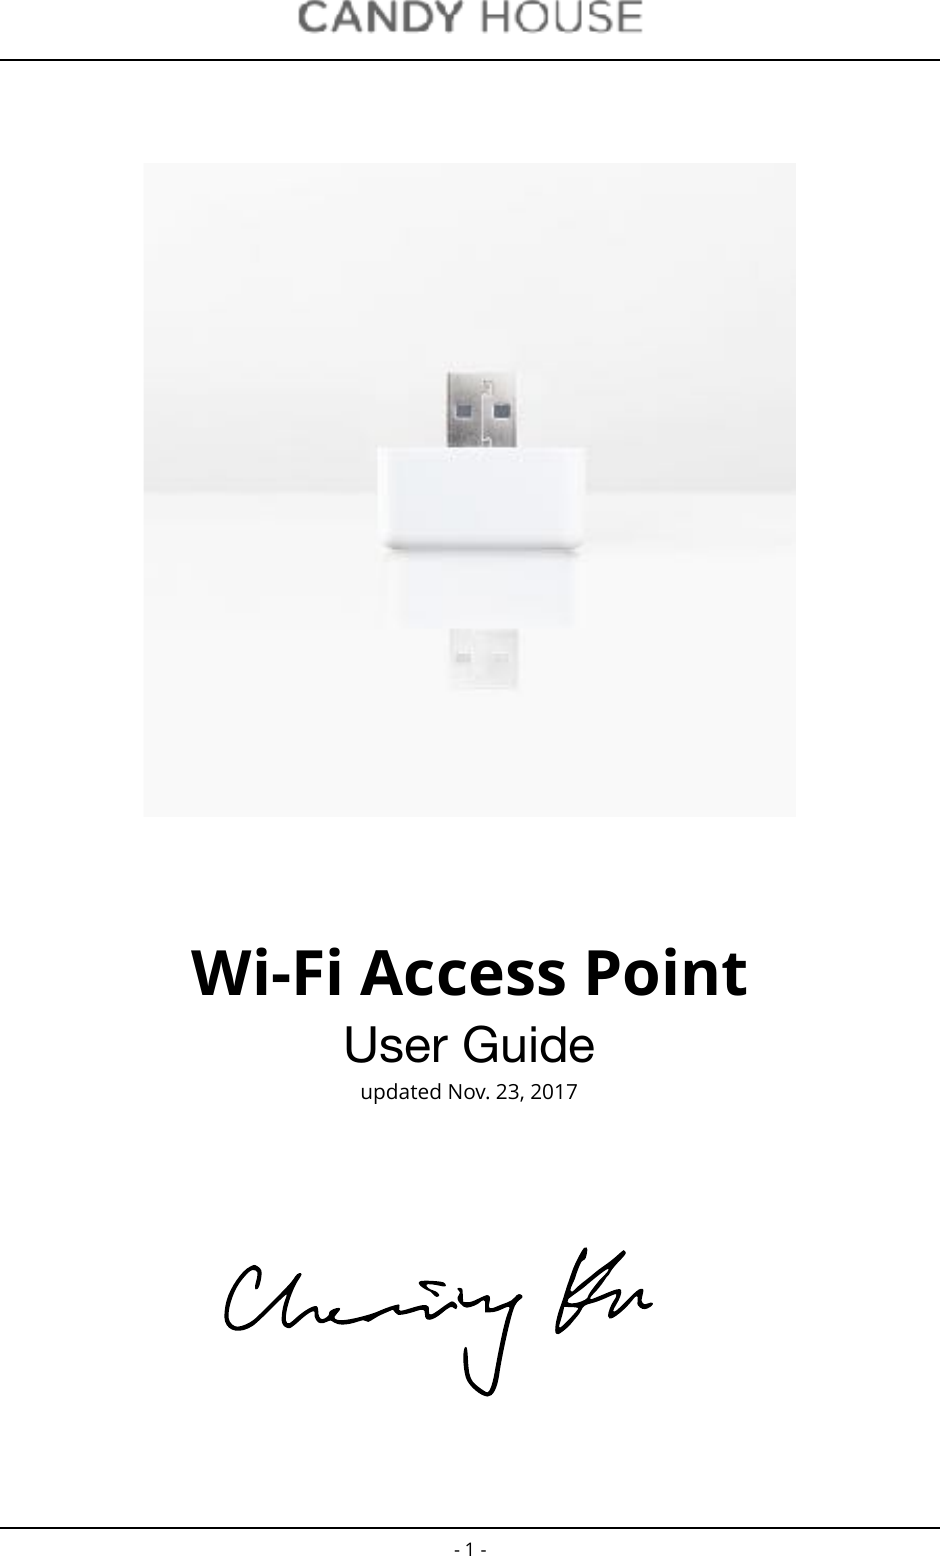  Wi-Fi Access Point  User Guide&quot;updated Nov. 23, 2017!-   -1